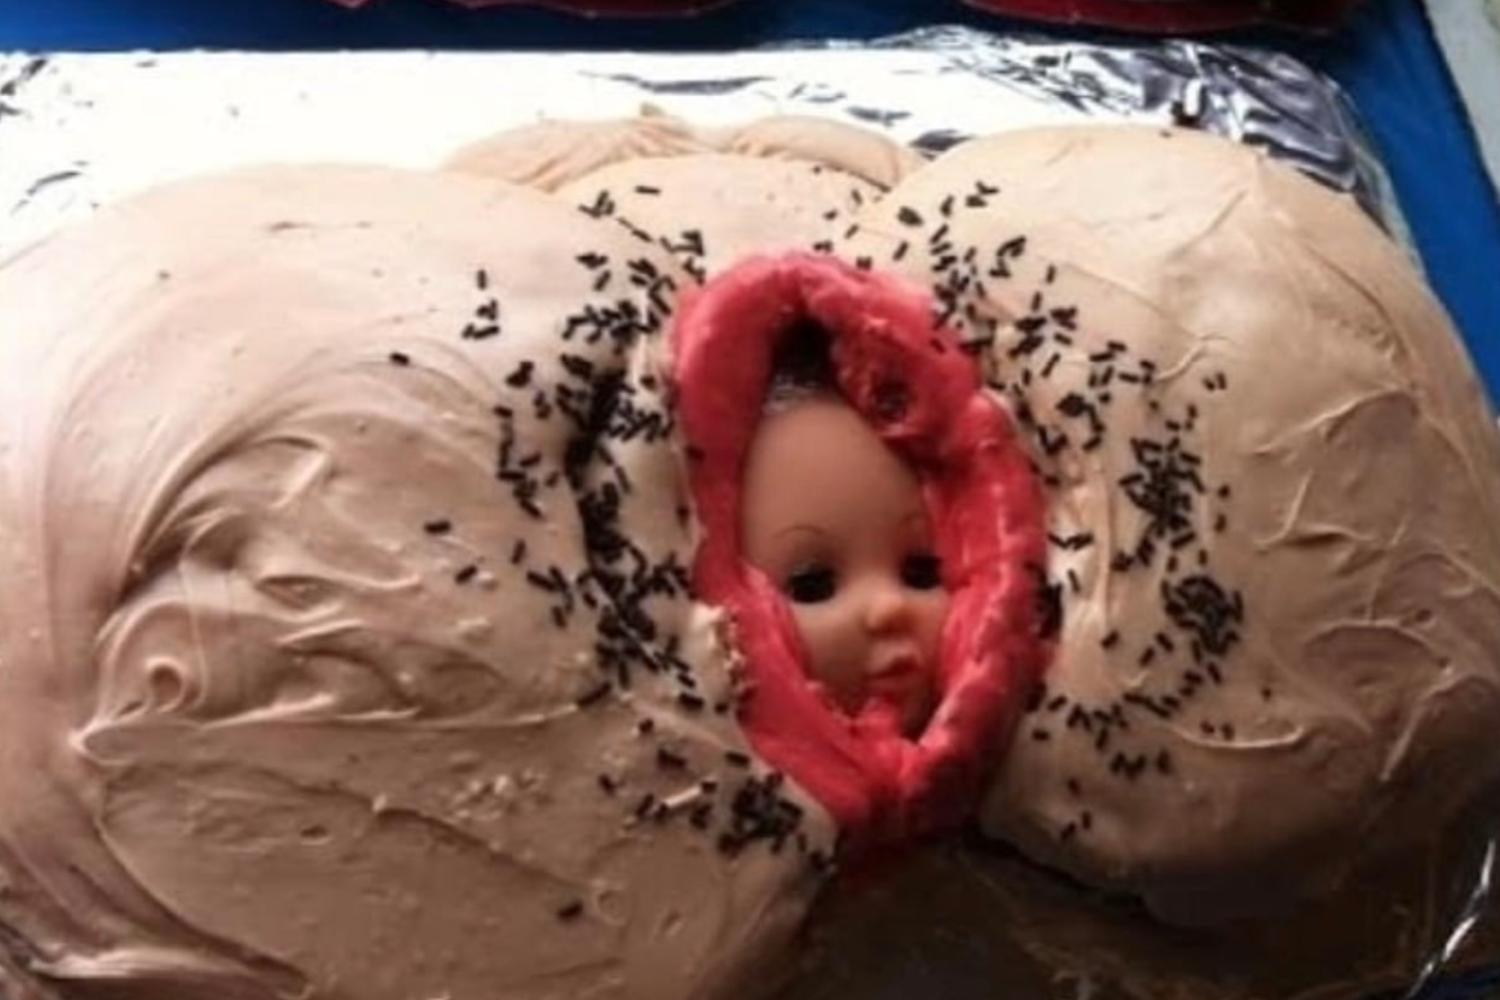 14 of the worst c-section baby shower cakes we have ever come across.